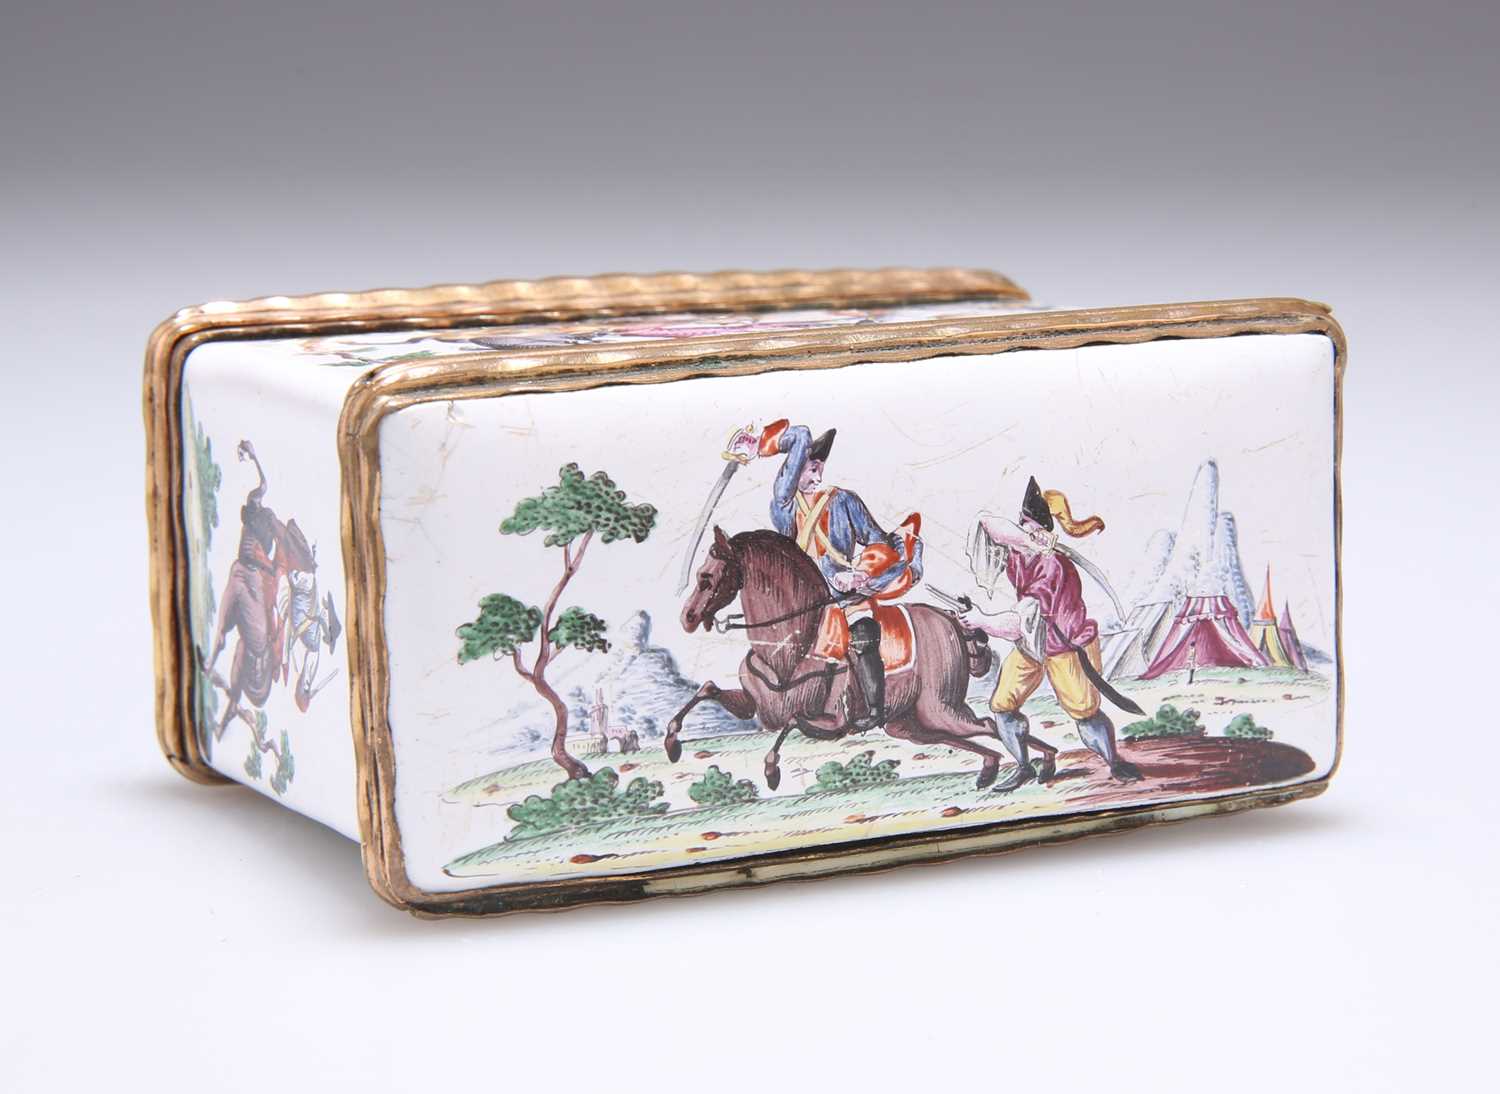 A RARE GERMAN ENAMEL DOUBLE-OPENING SNUFF BOX, FREDERICK THE GREAT, CIRCA 1730 - Image 3 of 7